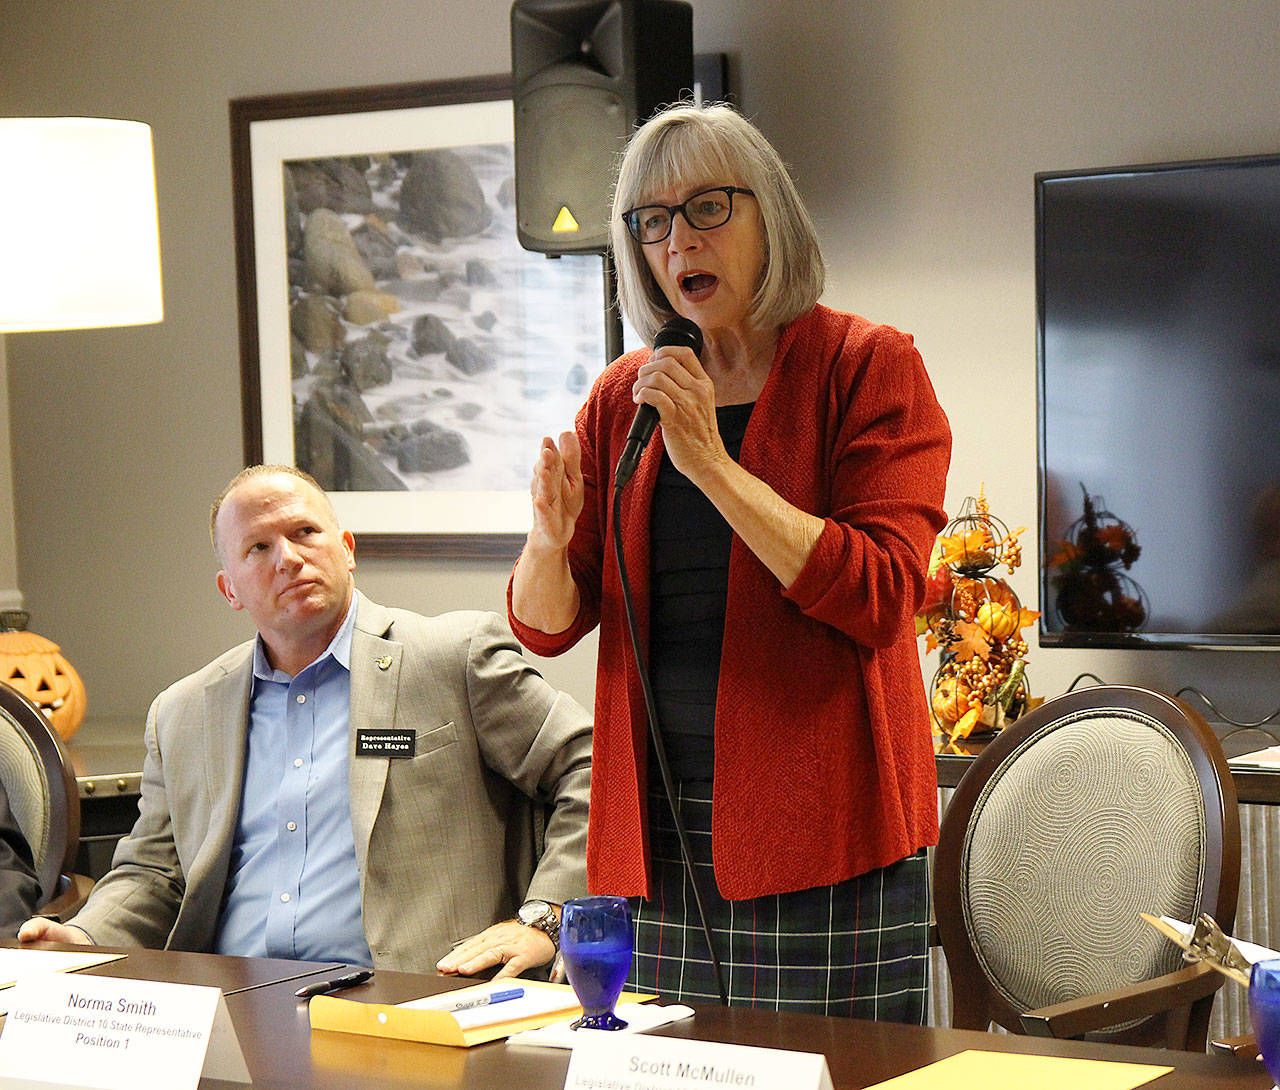 Rep. Norma Smith, R-Clinton, speaks at a forum Monday morning at Regency on Whidbey while Rep. Dave Hayes, R-Camano Island, looks on. A representative for Dave Paul and candidate Scott McMullen also attended the event. Photo by Laura Guido/Whidbey News Group